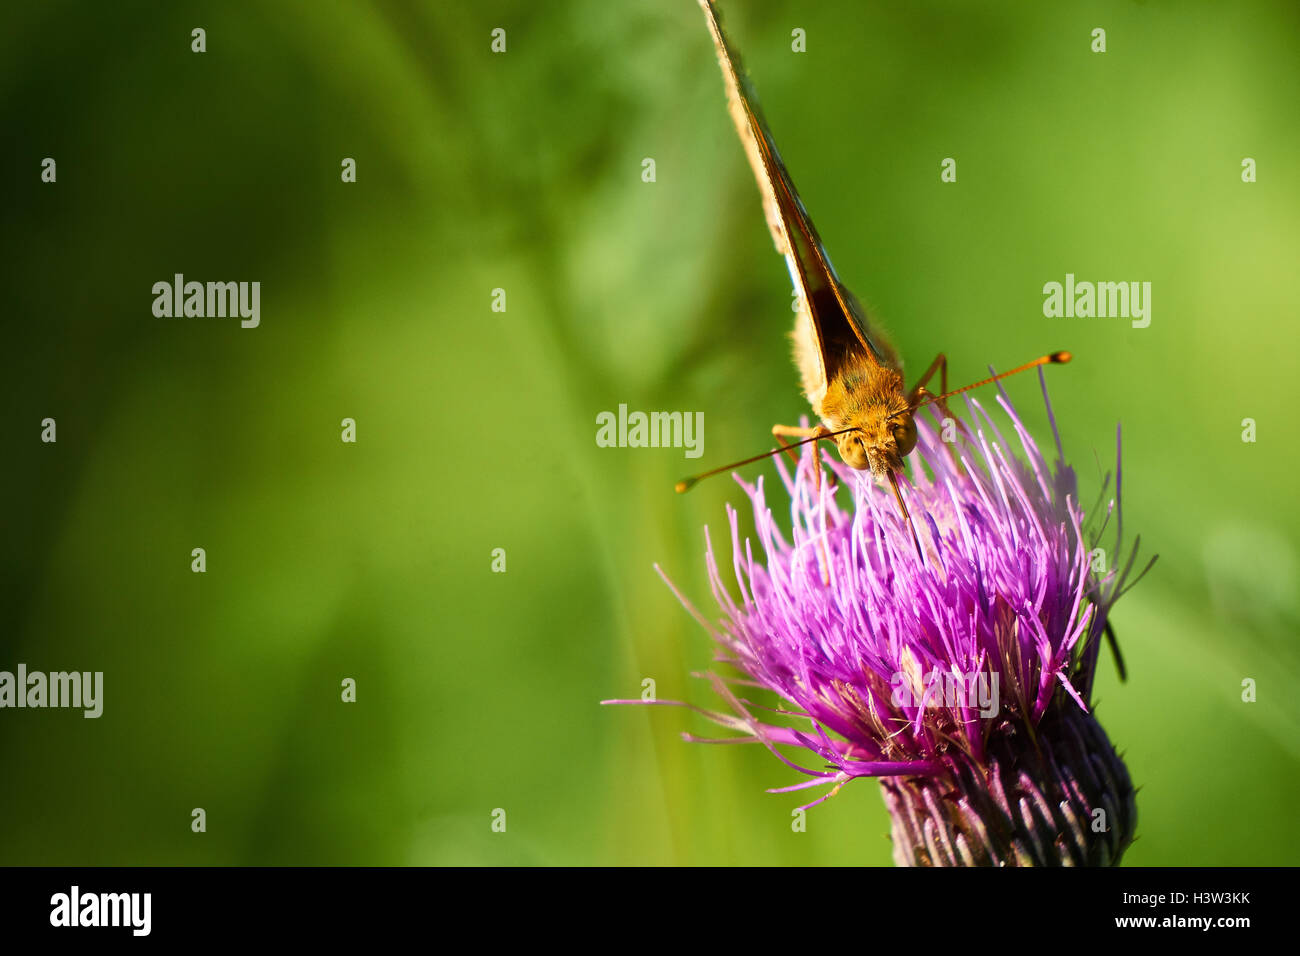 Macro image of small yellow butterfly on purple thistle. Stock Photo